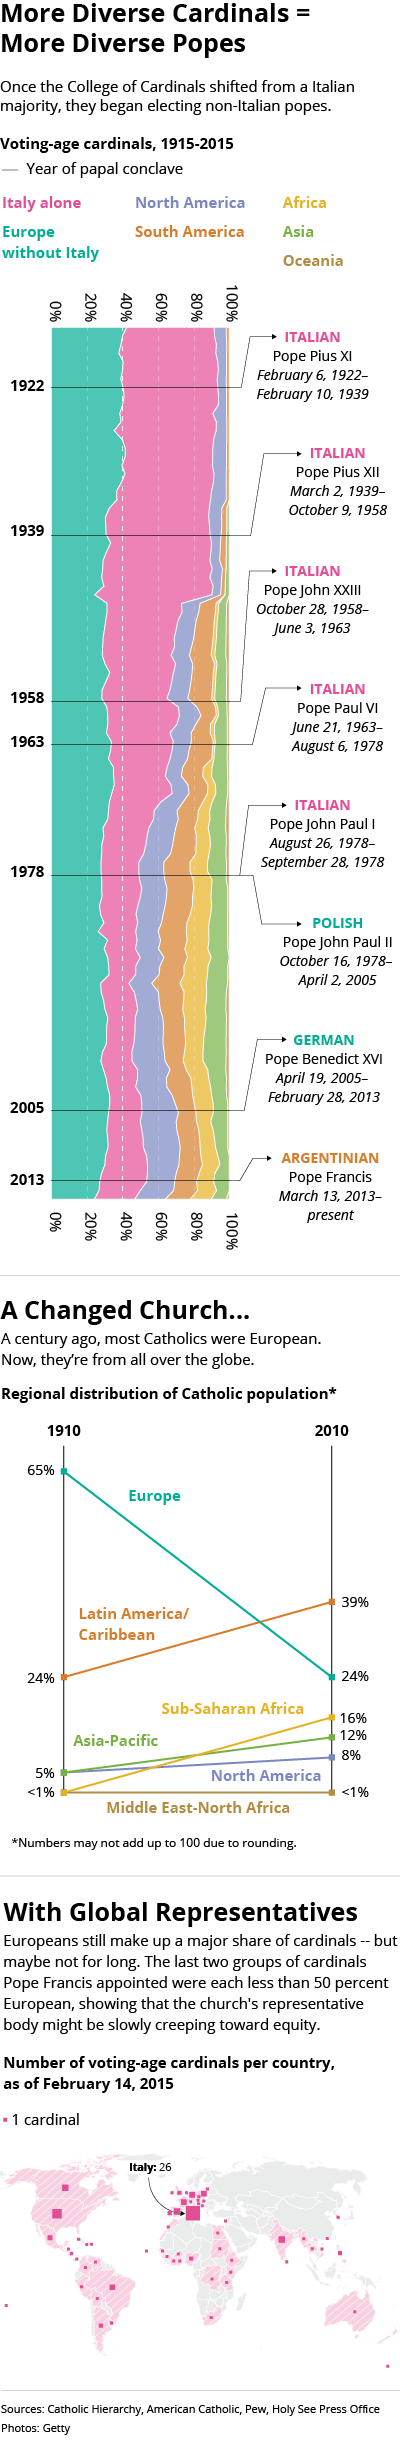 Catholic Leadership Is More Diverse Than Ever